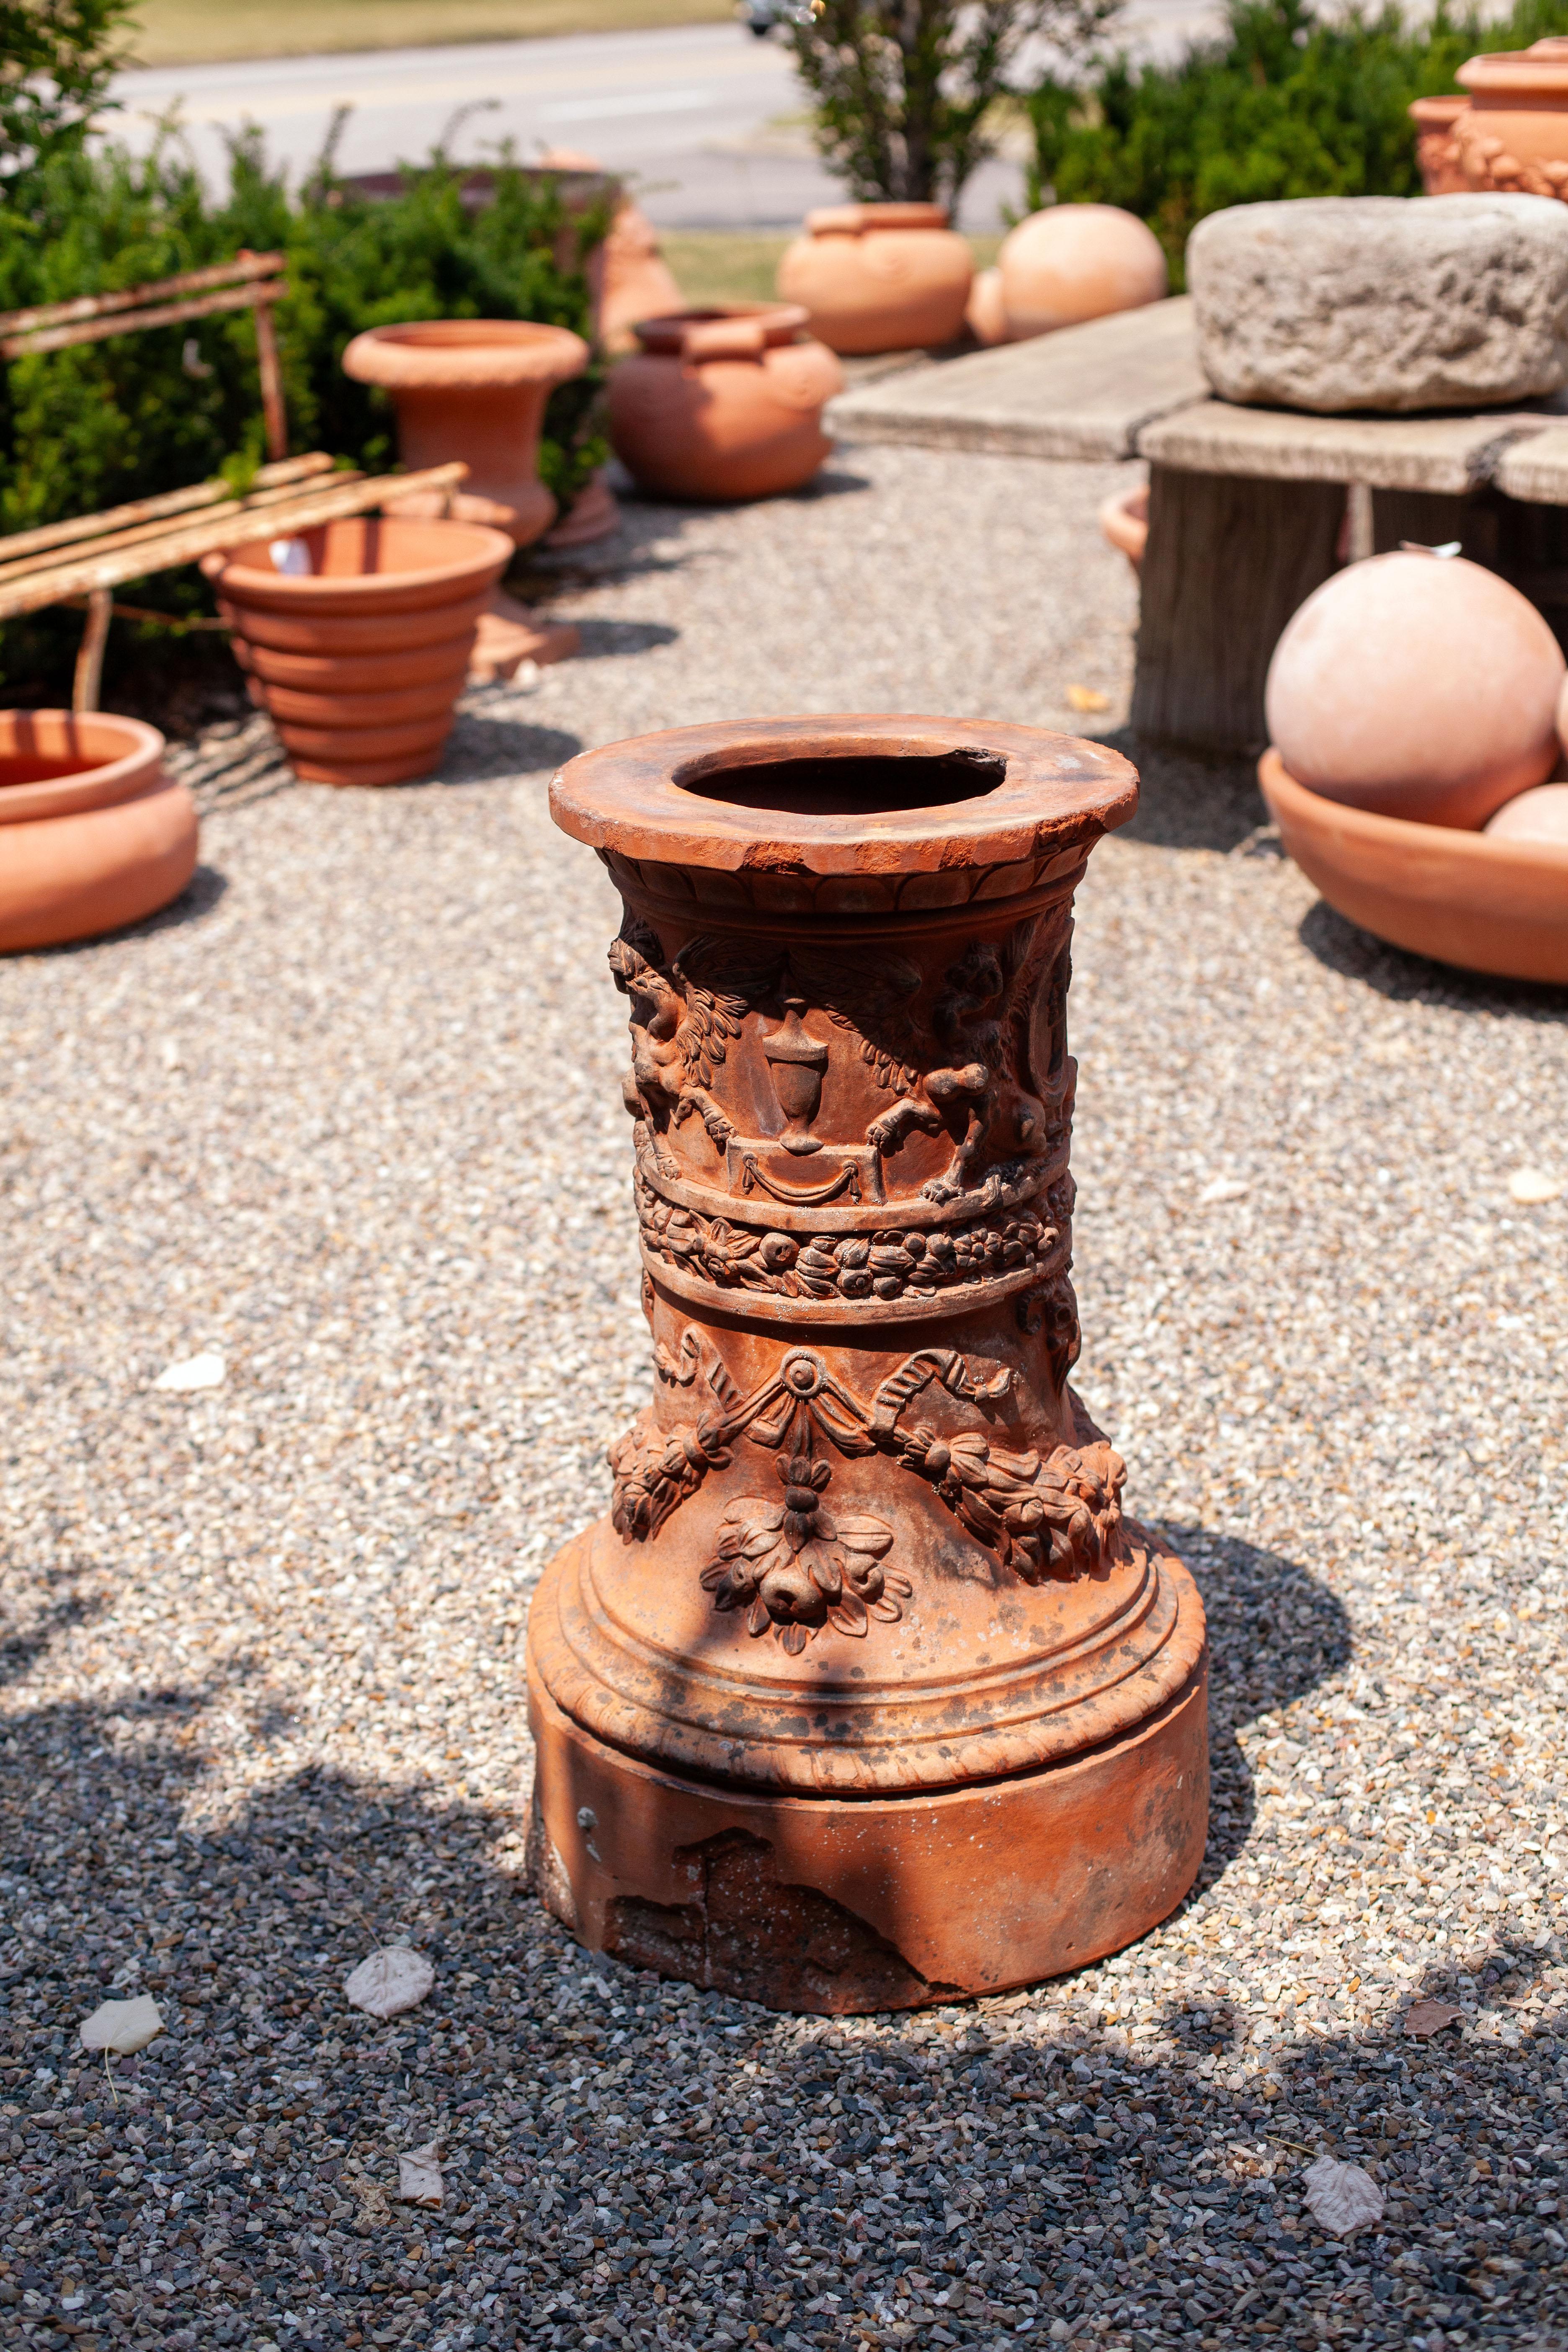 The Ricceri family has been working with terracotta since the 18th century. The Antica Manifattura Ricceri d'Impruneta made hand-made bricks, terracotta tiles, and roof tiles, as well as more decorative objects. Crafted from terracotta, a material